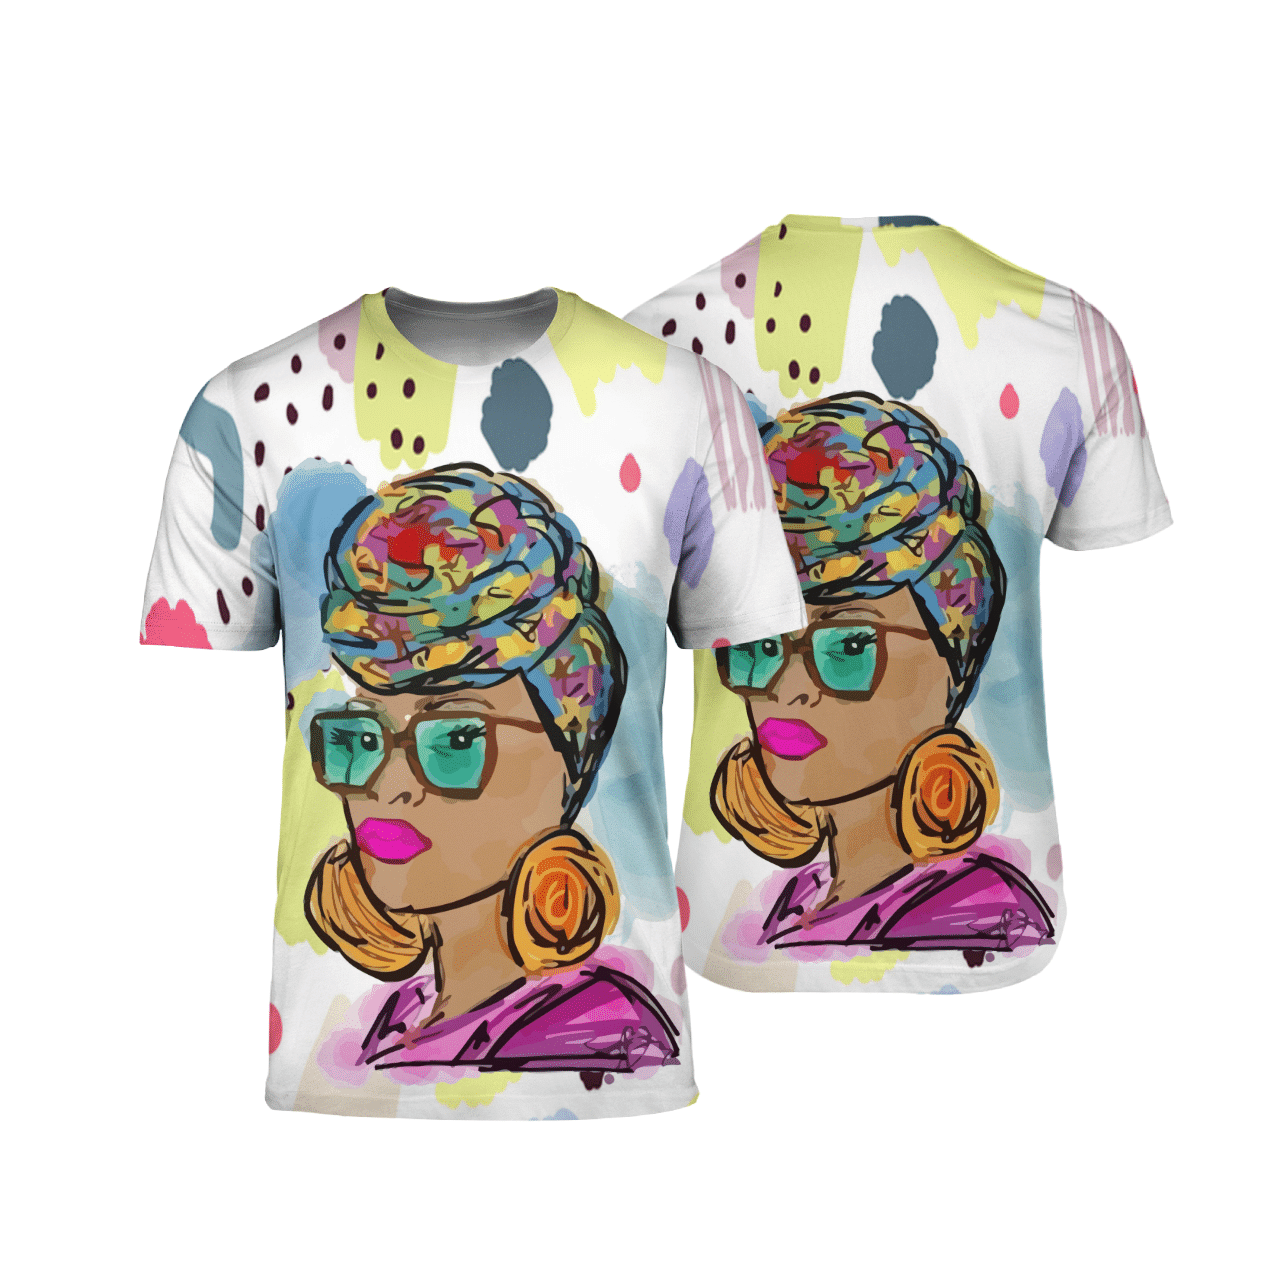 Headwrap Colorful Black Woman African American 3D T-Shirt